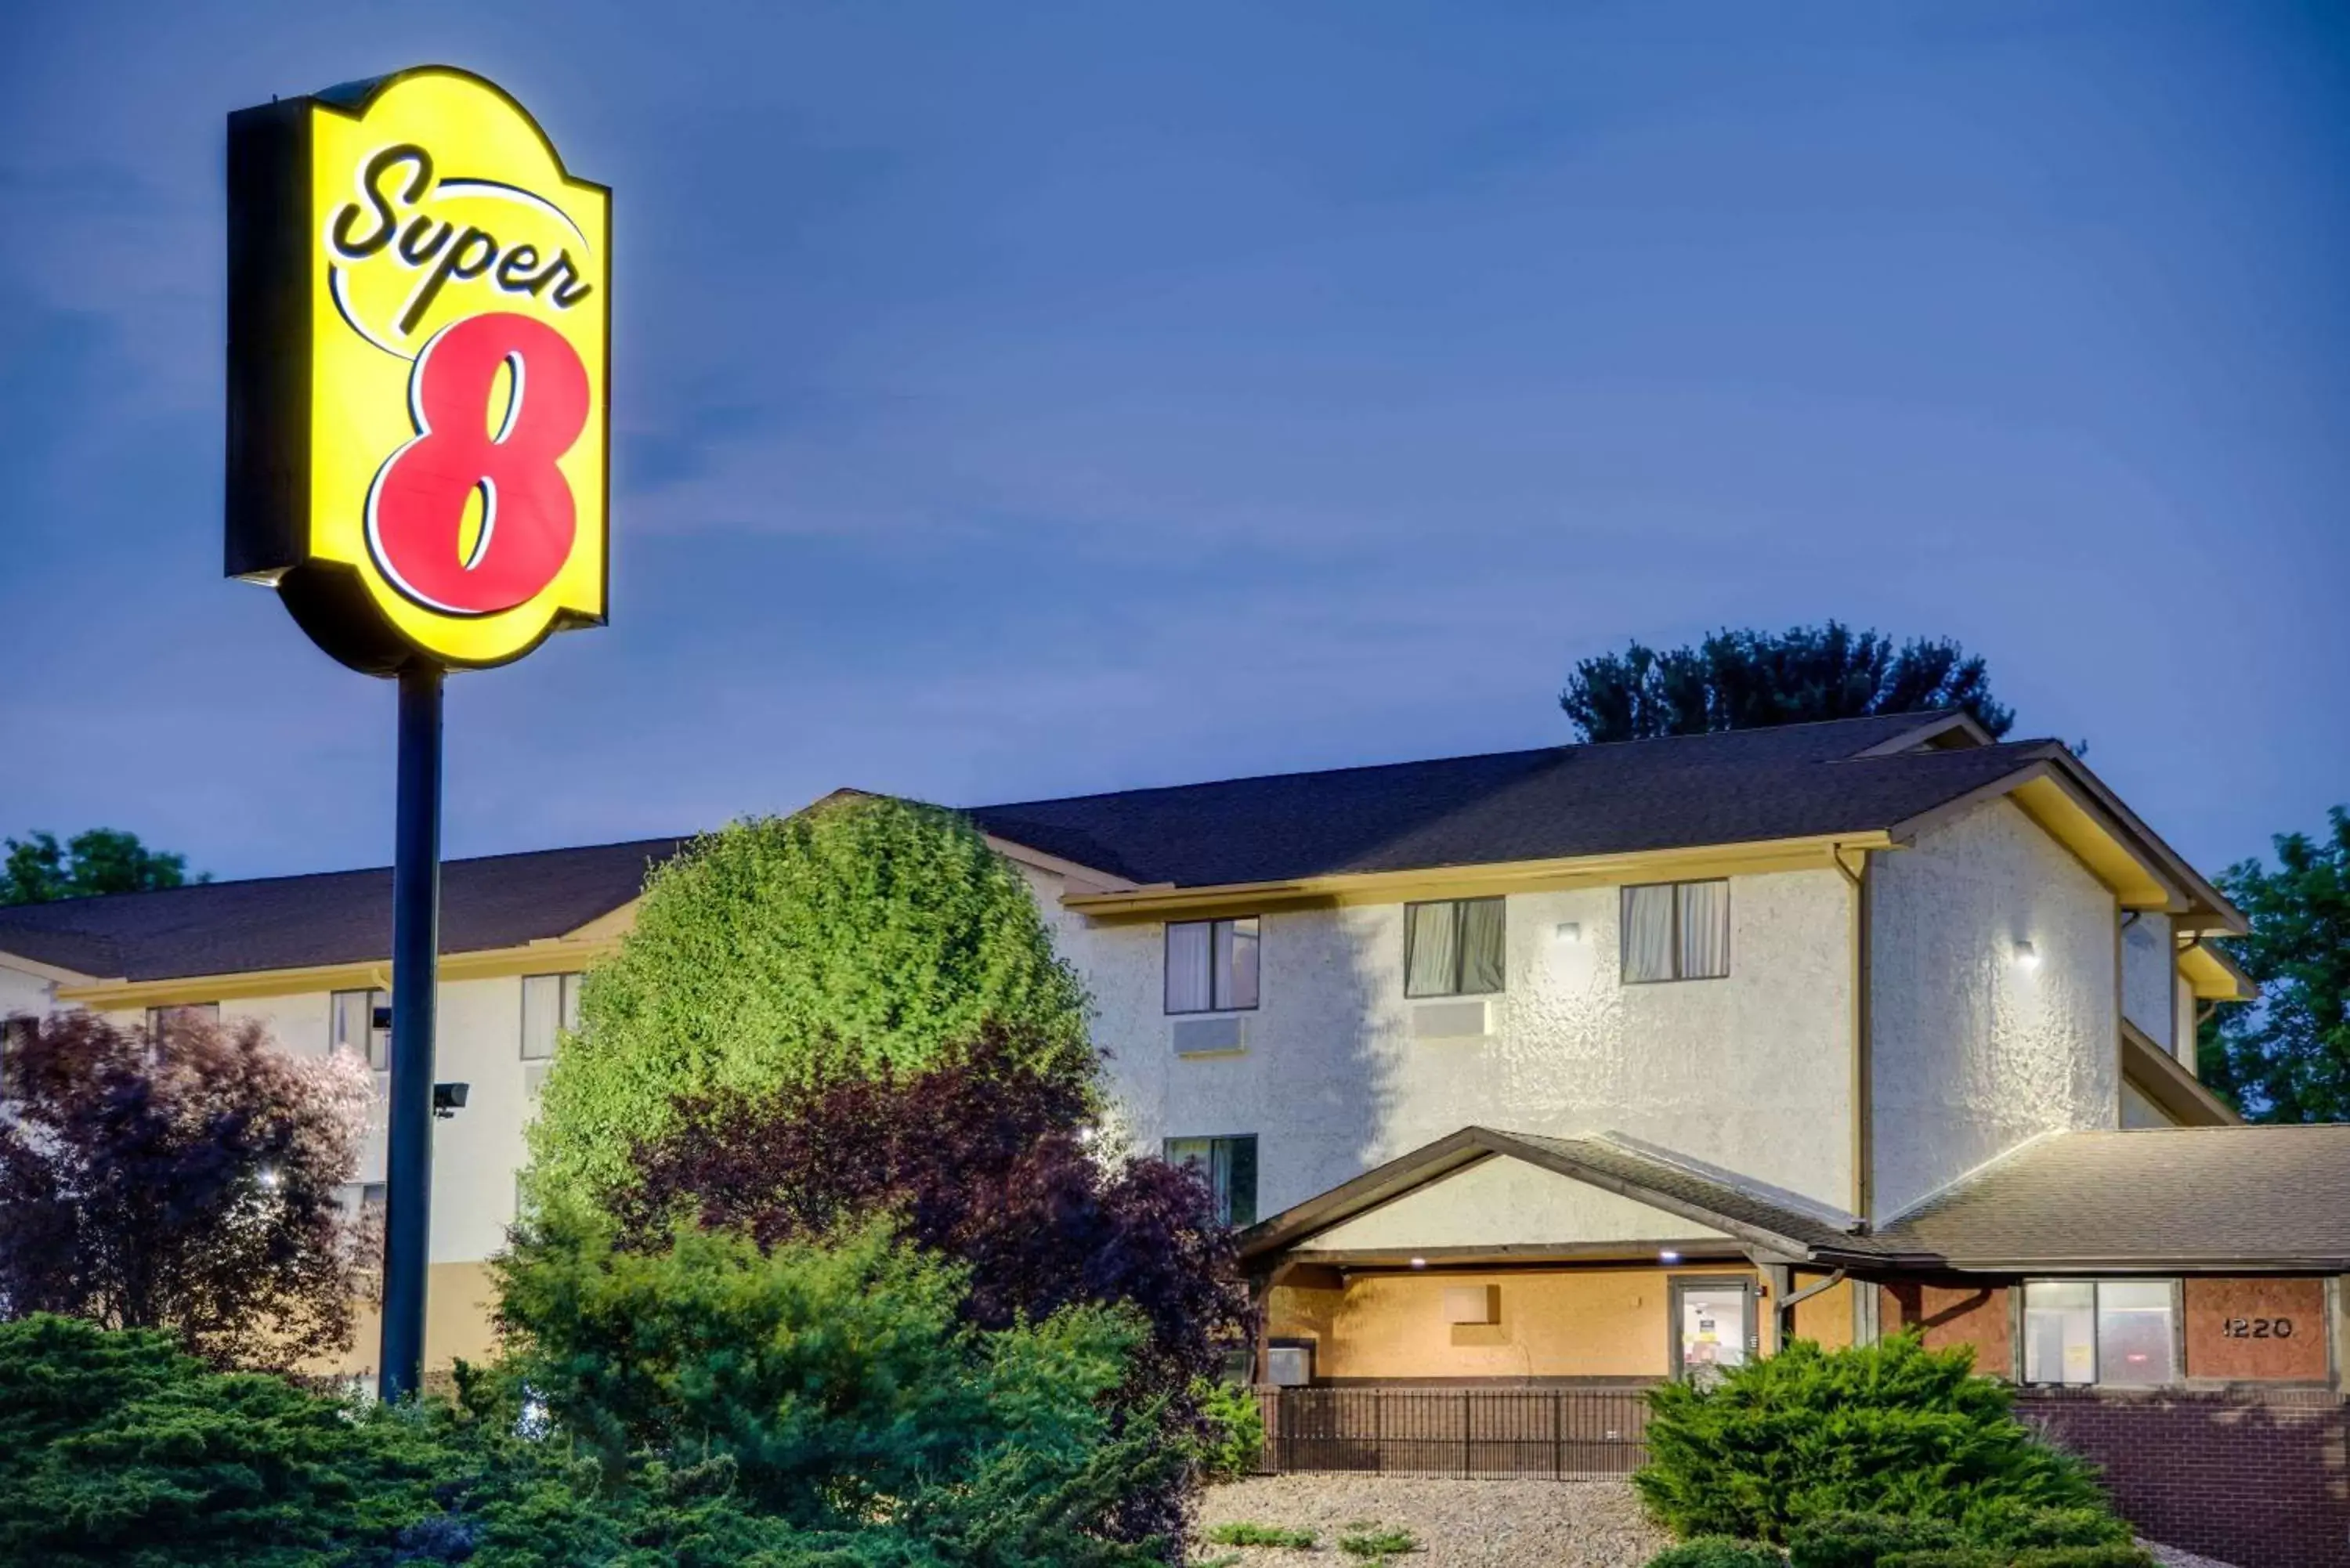 Property Building in Super 8 by Wyndham Hagerstown